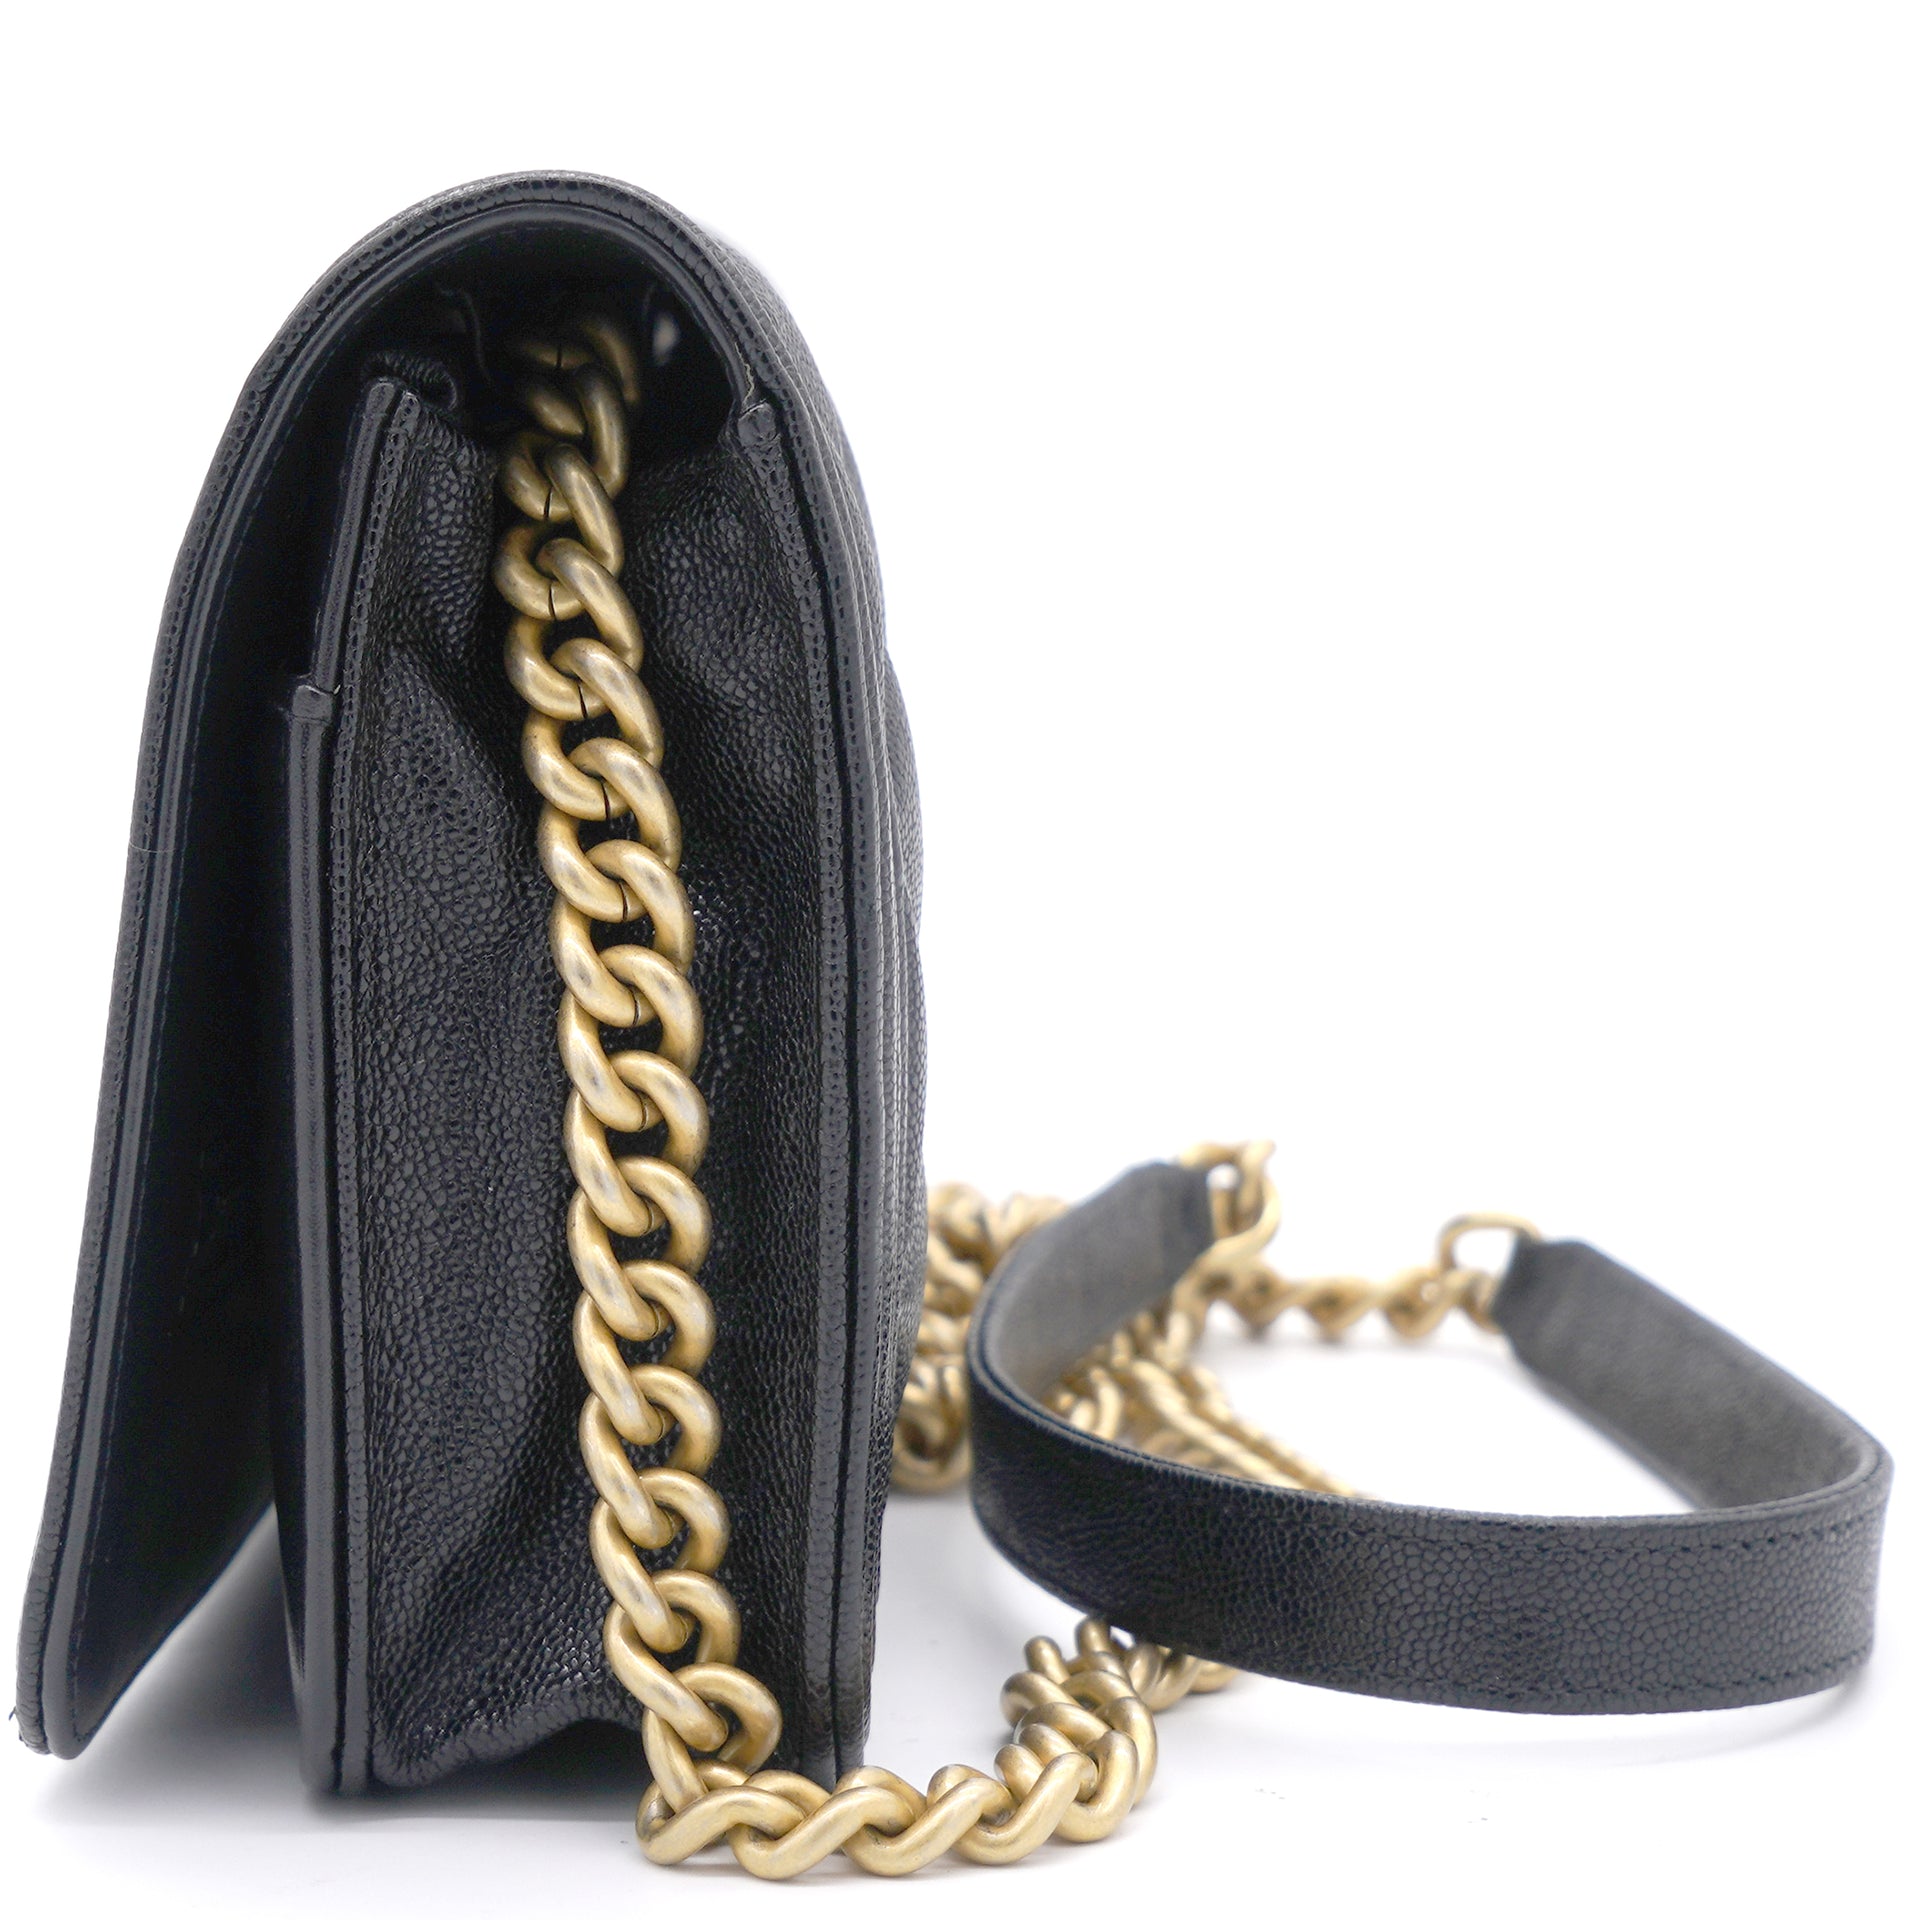 Caviar Quilted Boy Wallet on Chain WOC Black